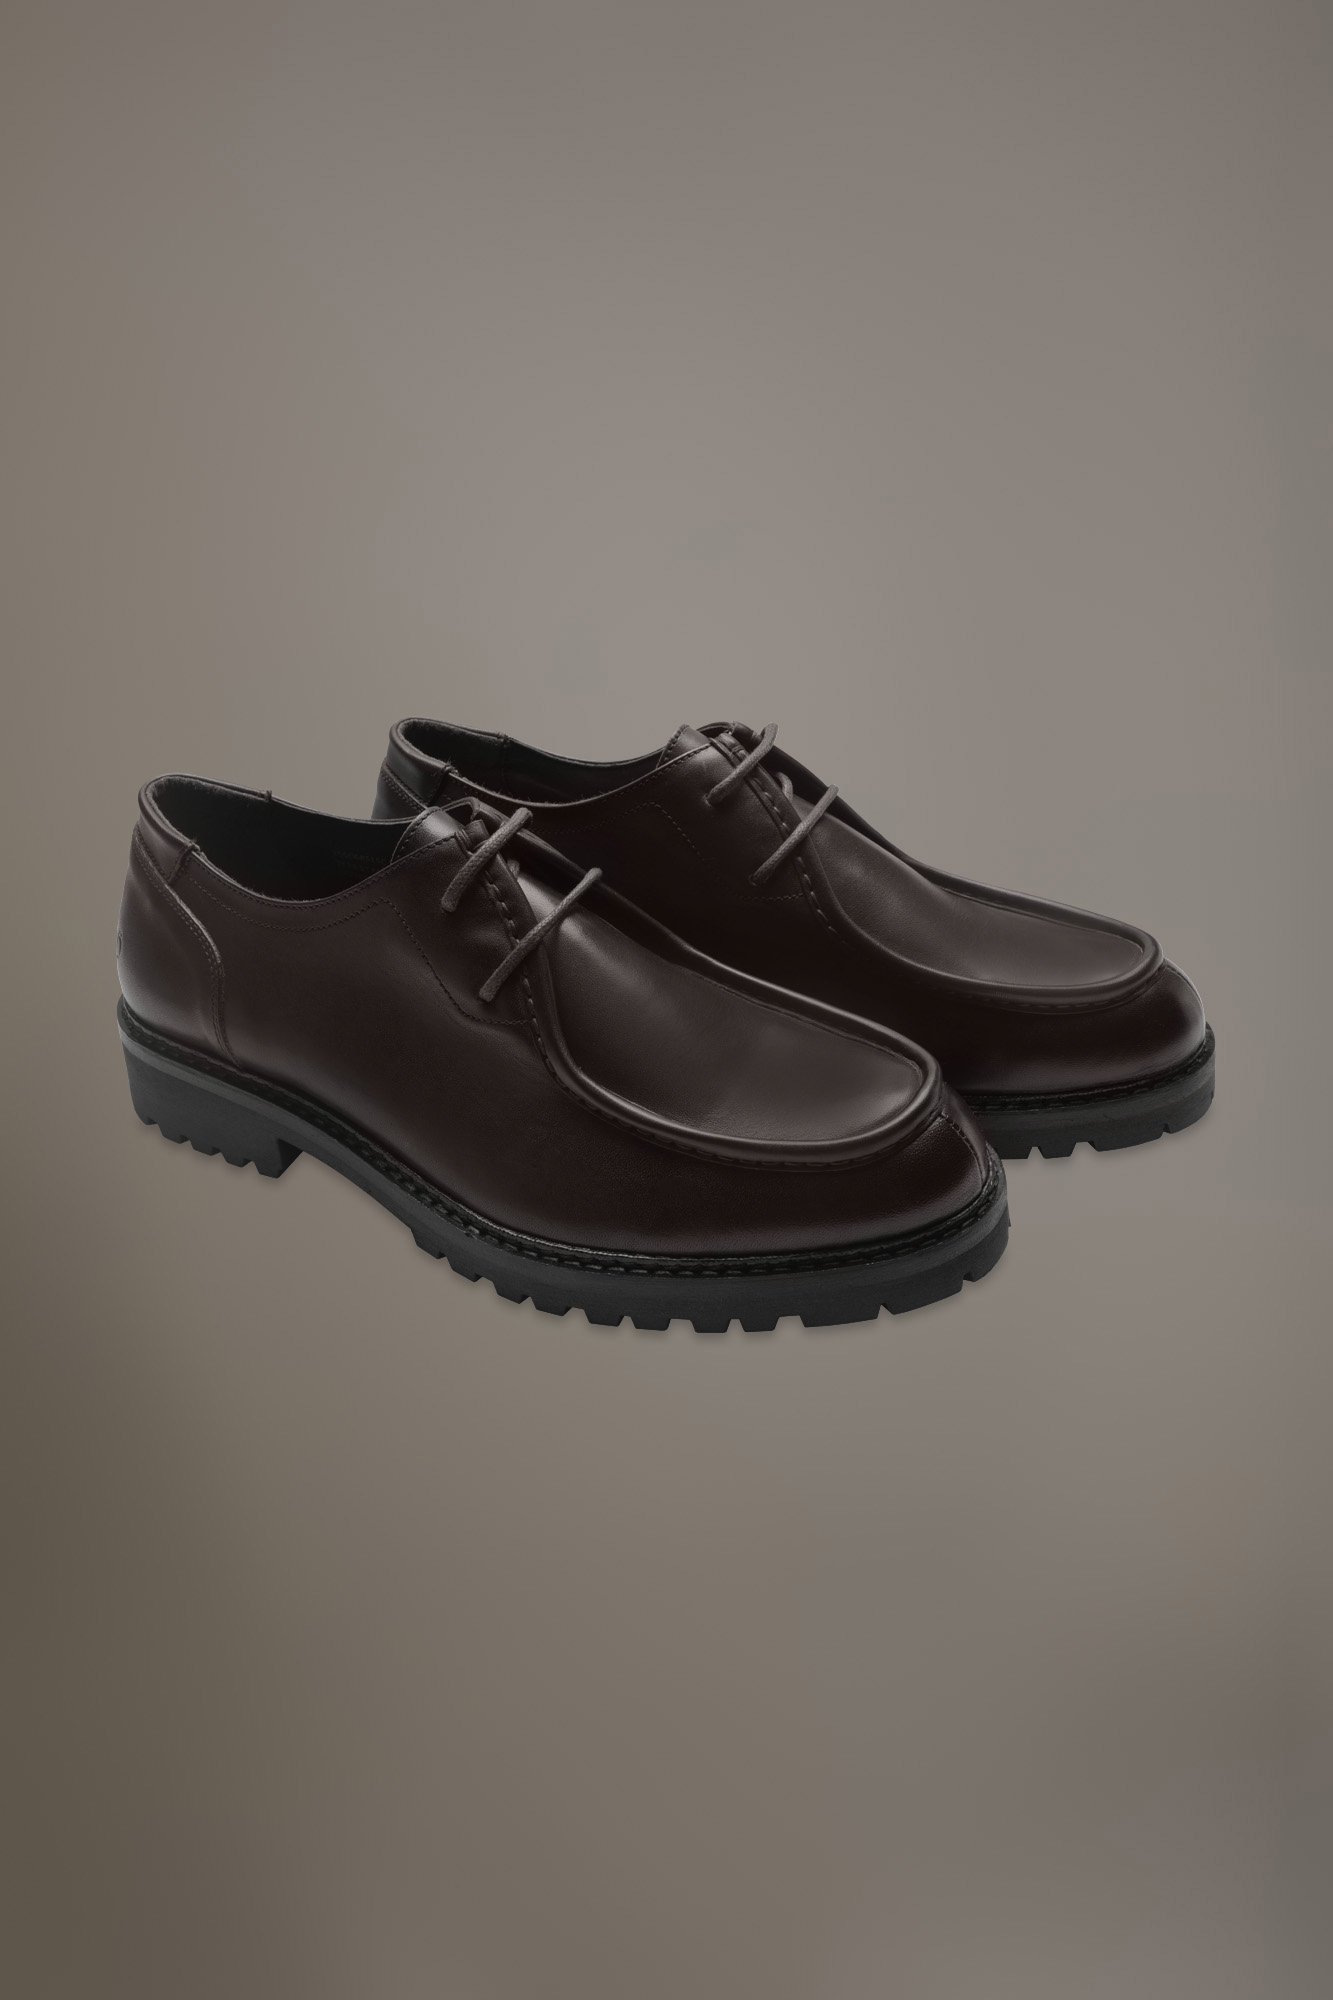 100% leather ranger shoe with rubber sole